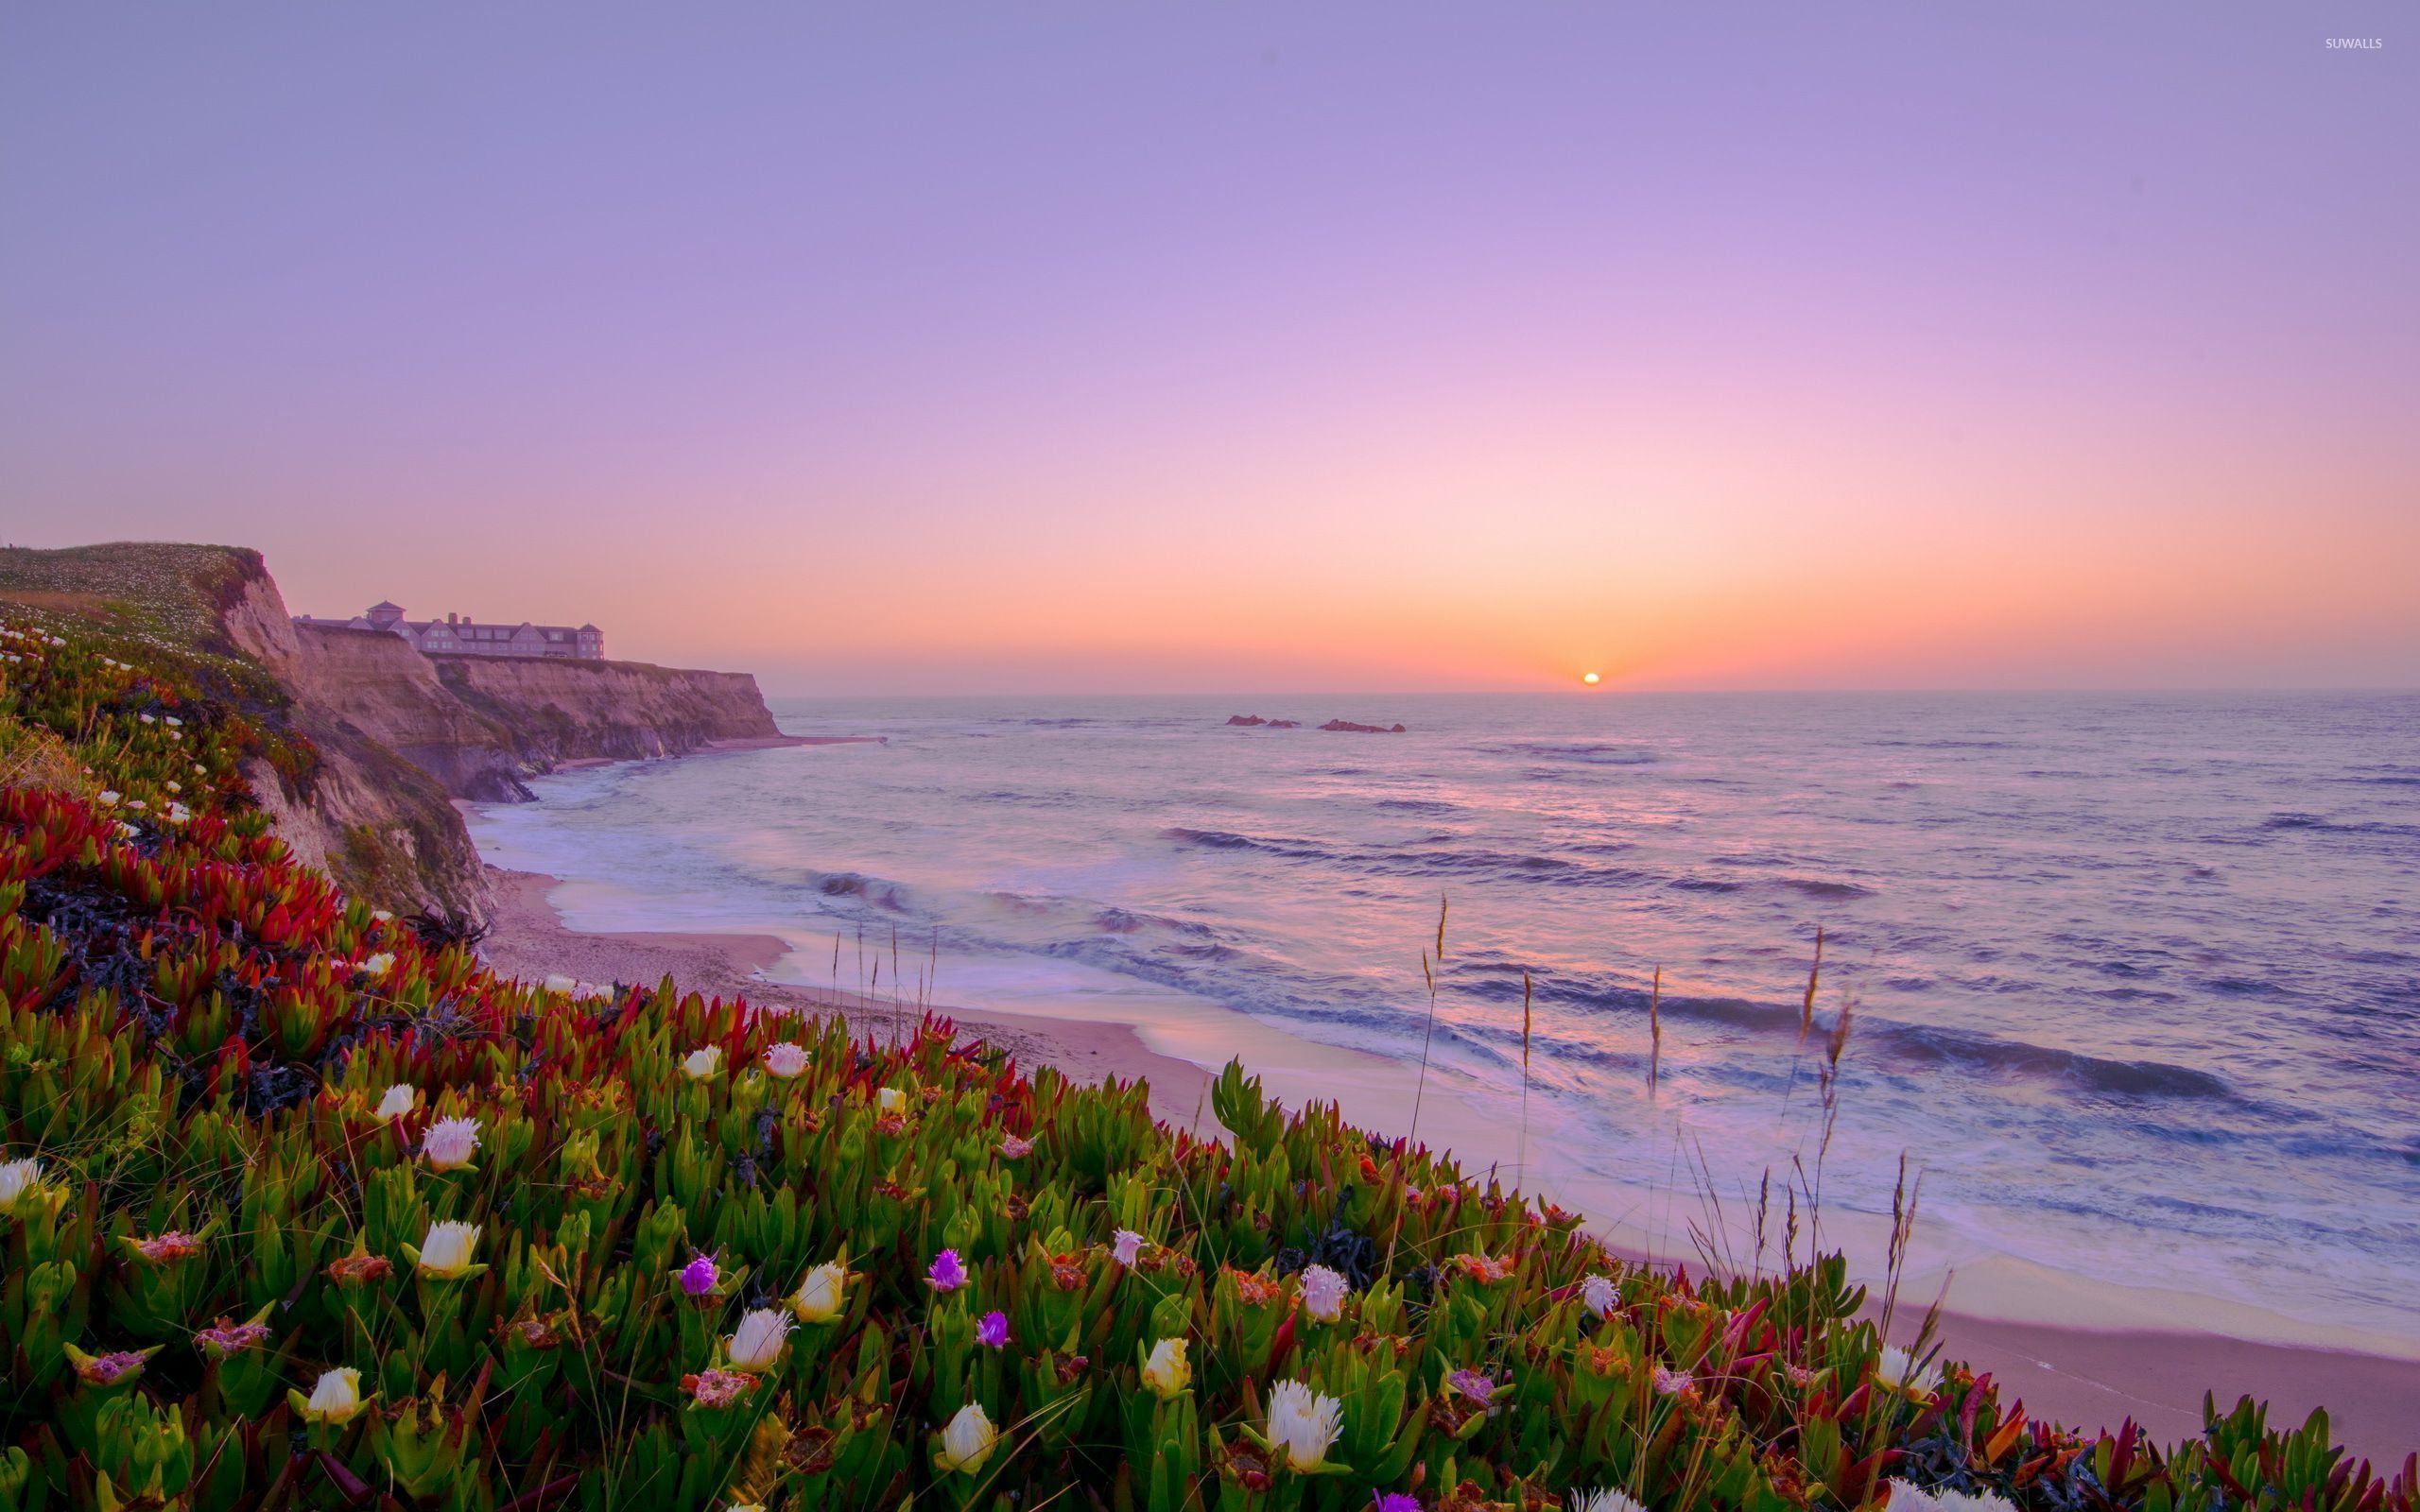 Sunset above a coast filled with colorful flowers wallpaper wallpaper